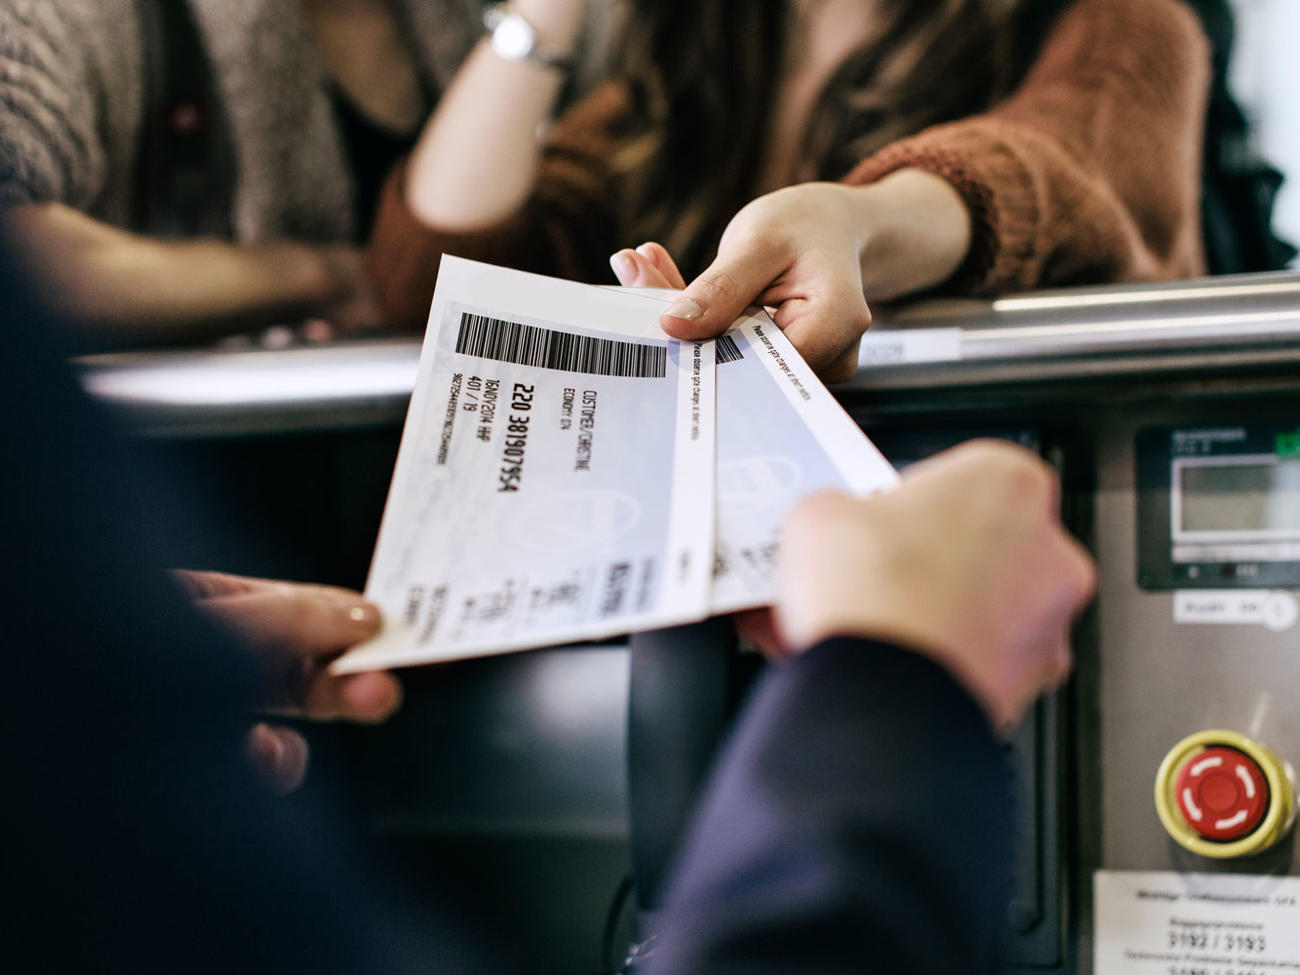 Why You Should Never Post a Photo of Your Boarding Pass on Social Media